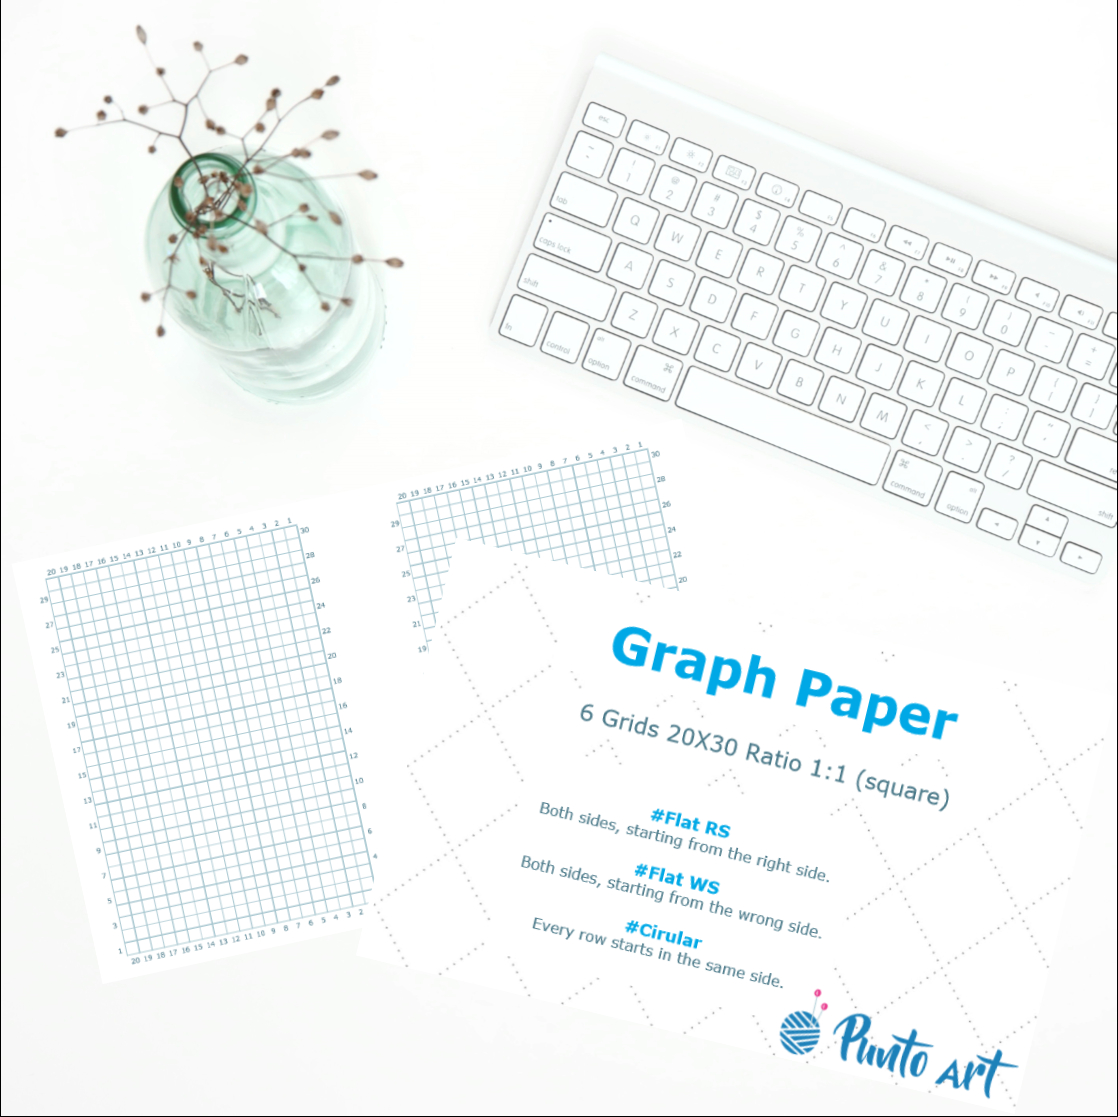 Graph Paper For Knitting Patterns Grid Patterns Graph Patterns To Knit And Crochet Punto Art